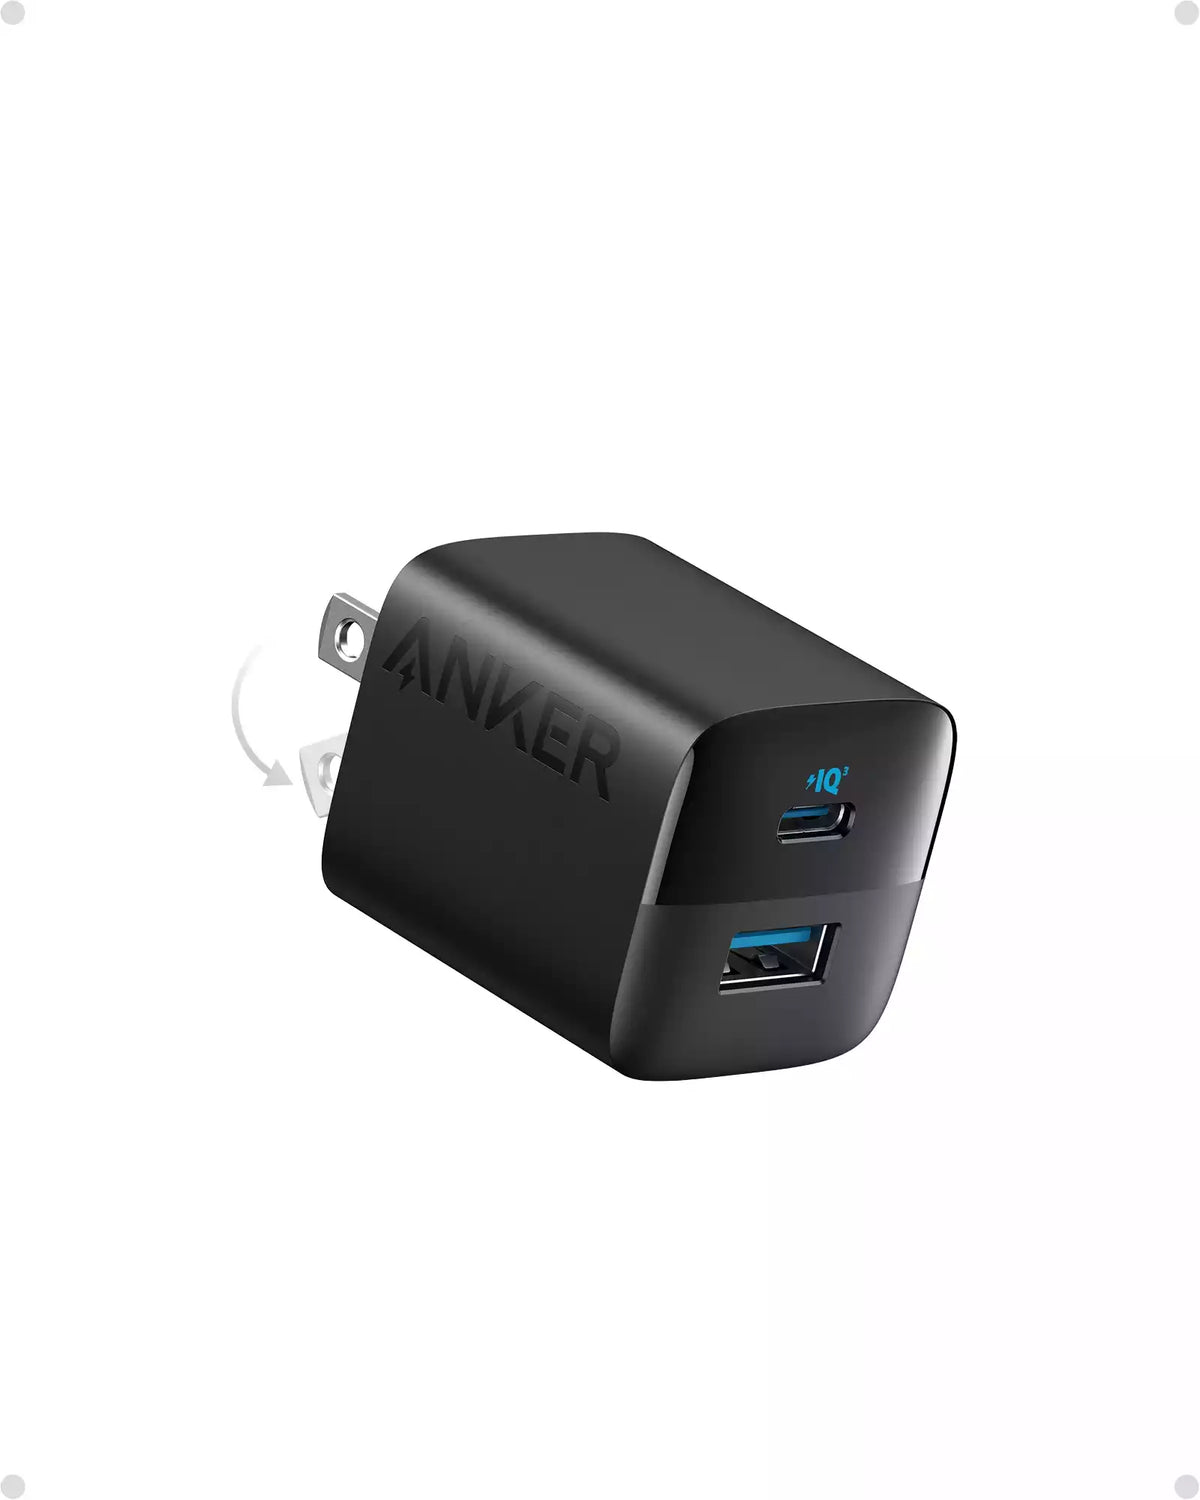 Anker A2331 323 (33W) Charger